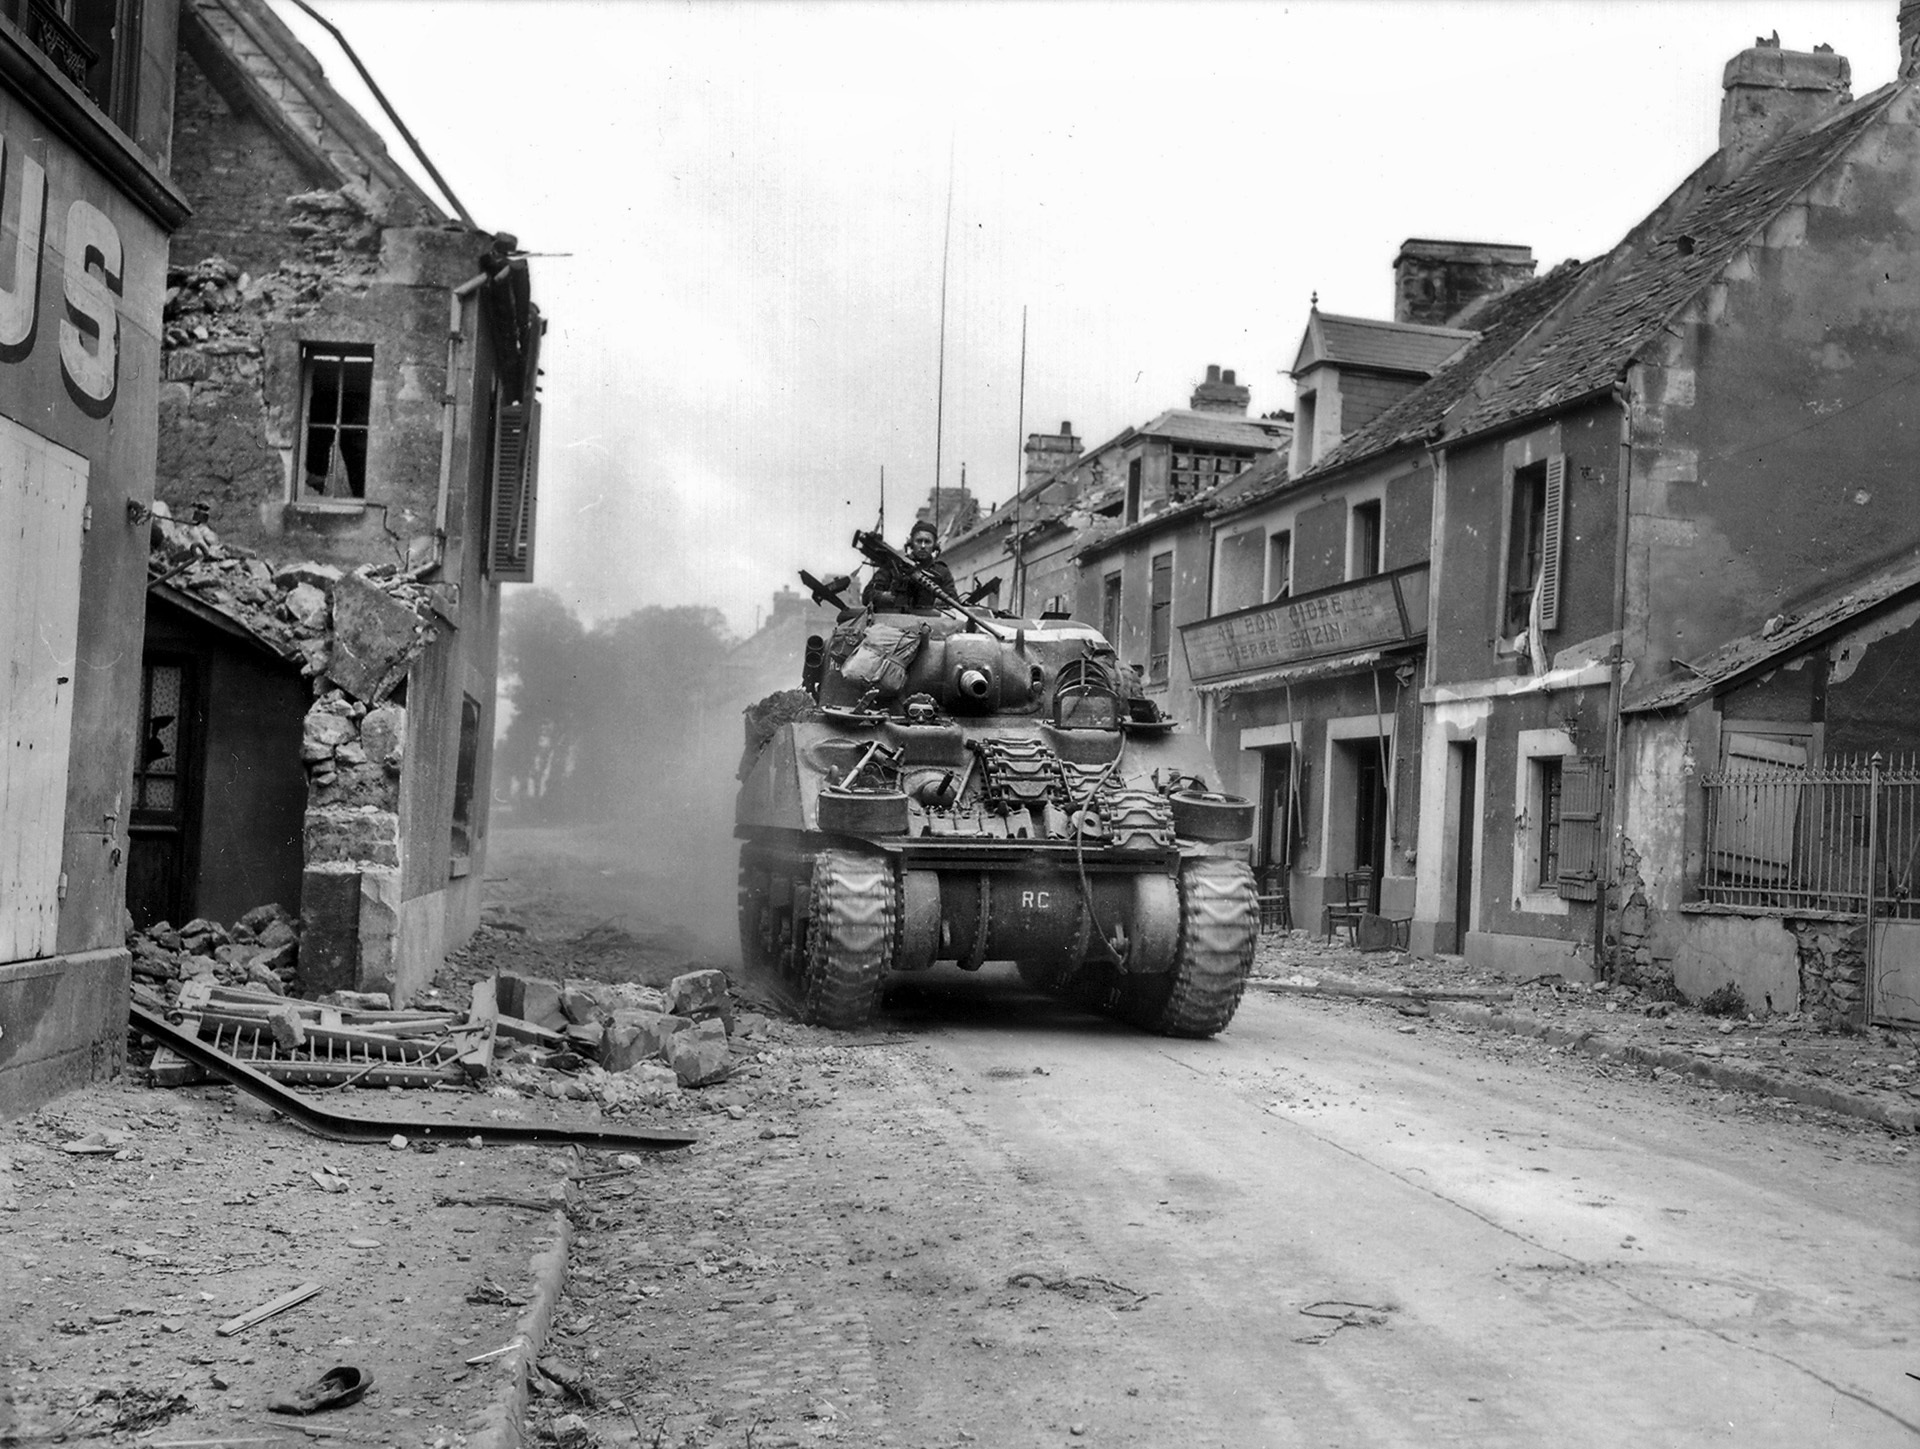 A Sherman tank from the Canadian 27th Tank Regiment rolls through the shattered, deserted streets of Caen after the Germans pulled out. The British/Canadians lost thousands of men and 300-500 tanks. The delay in securing Caen badly damaged Montgomery’s reputation among the Allies.